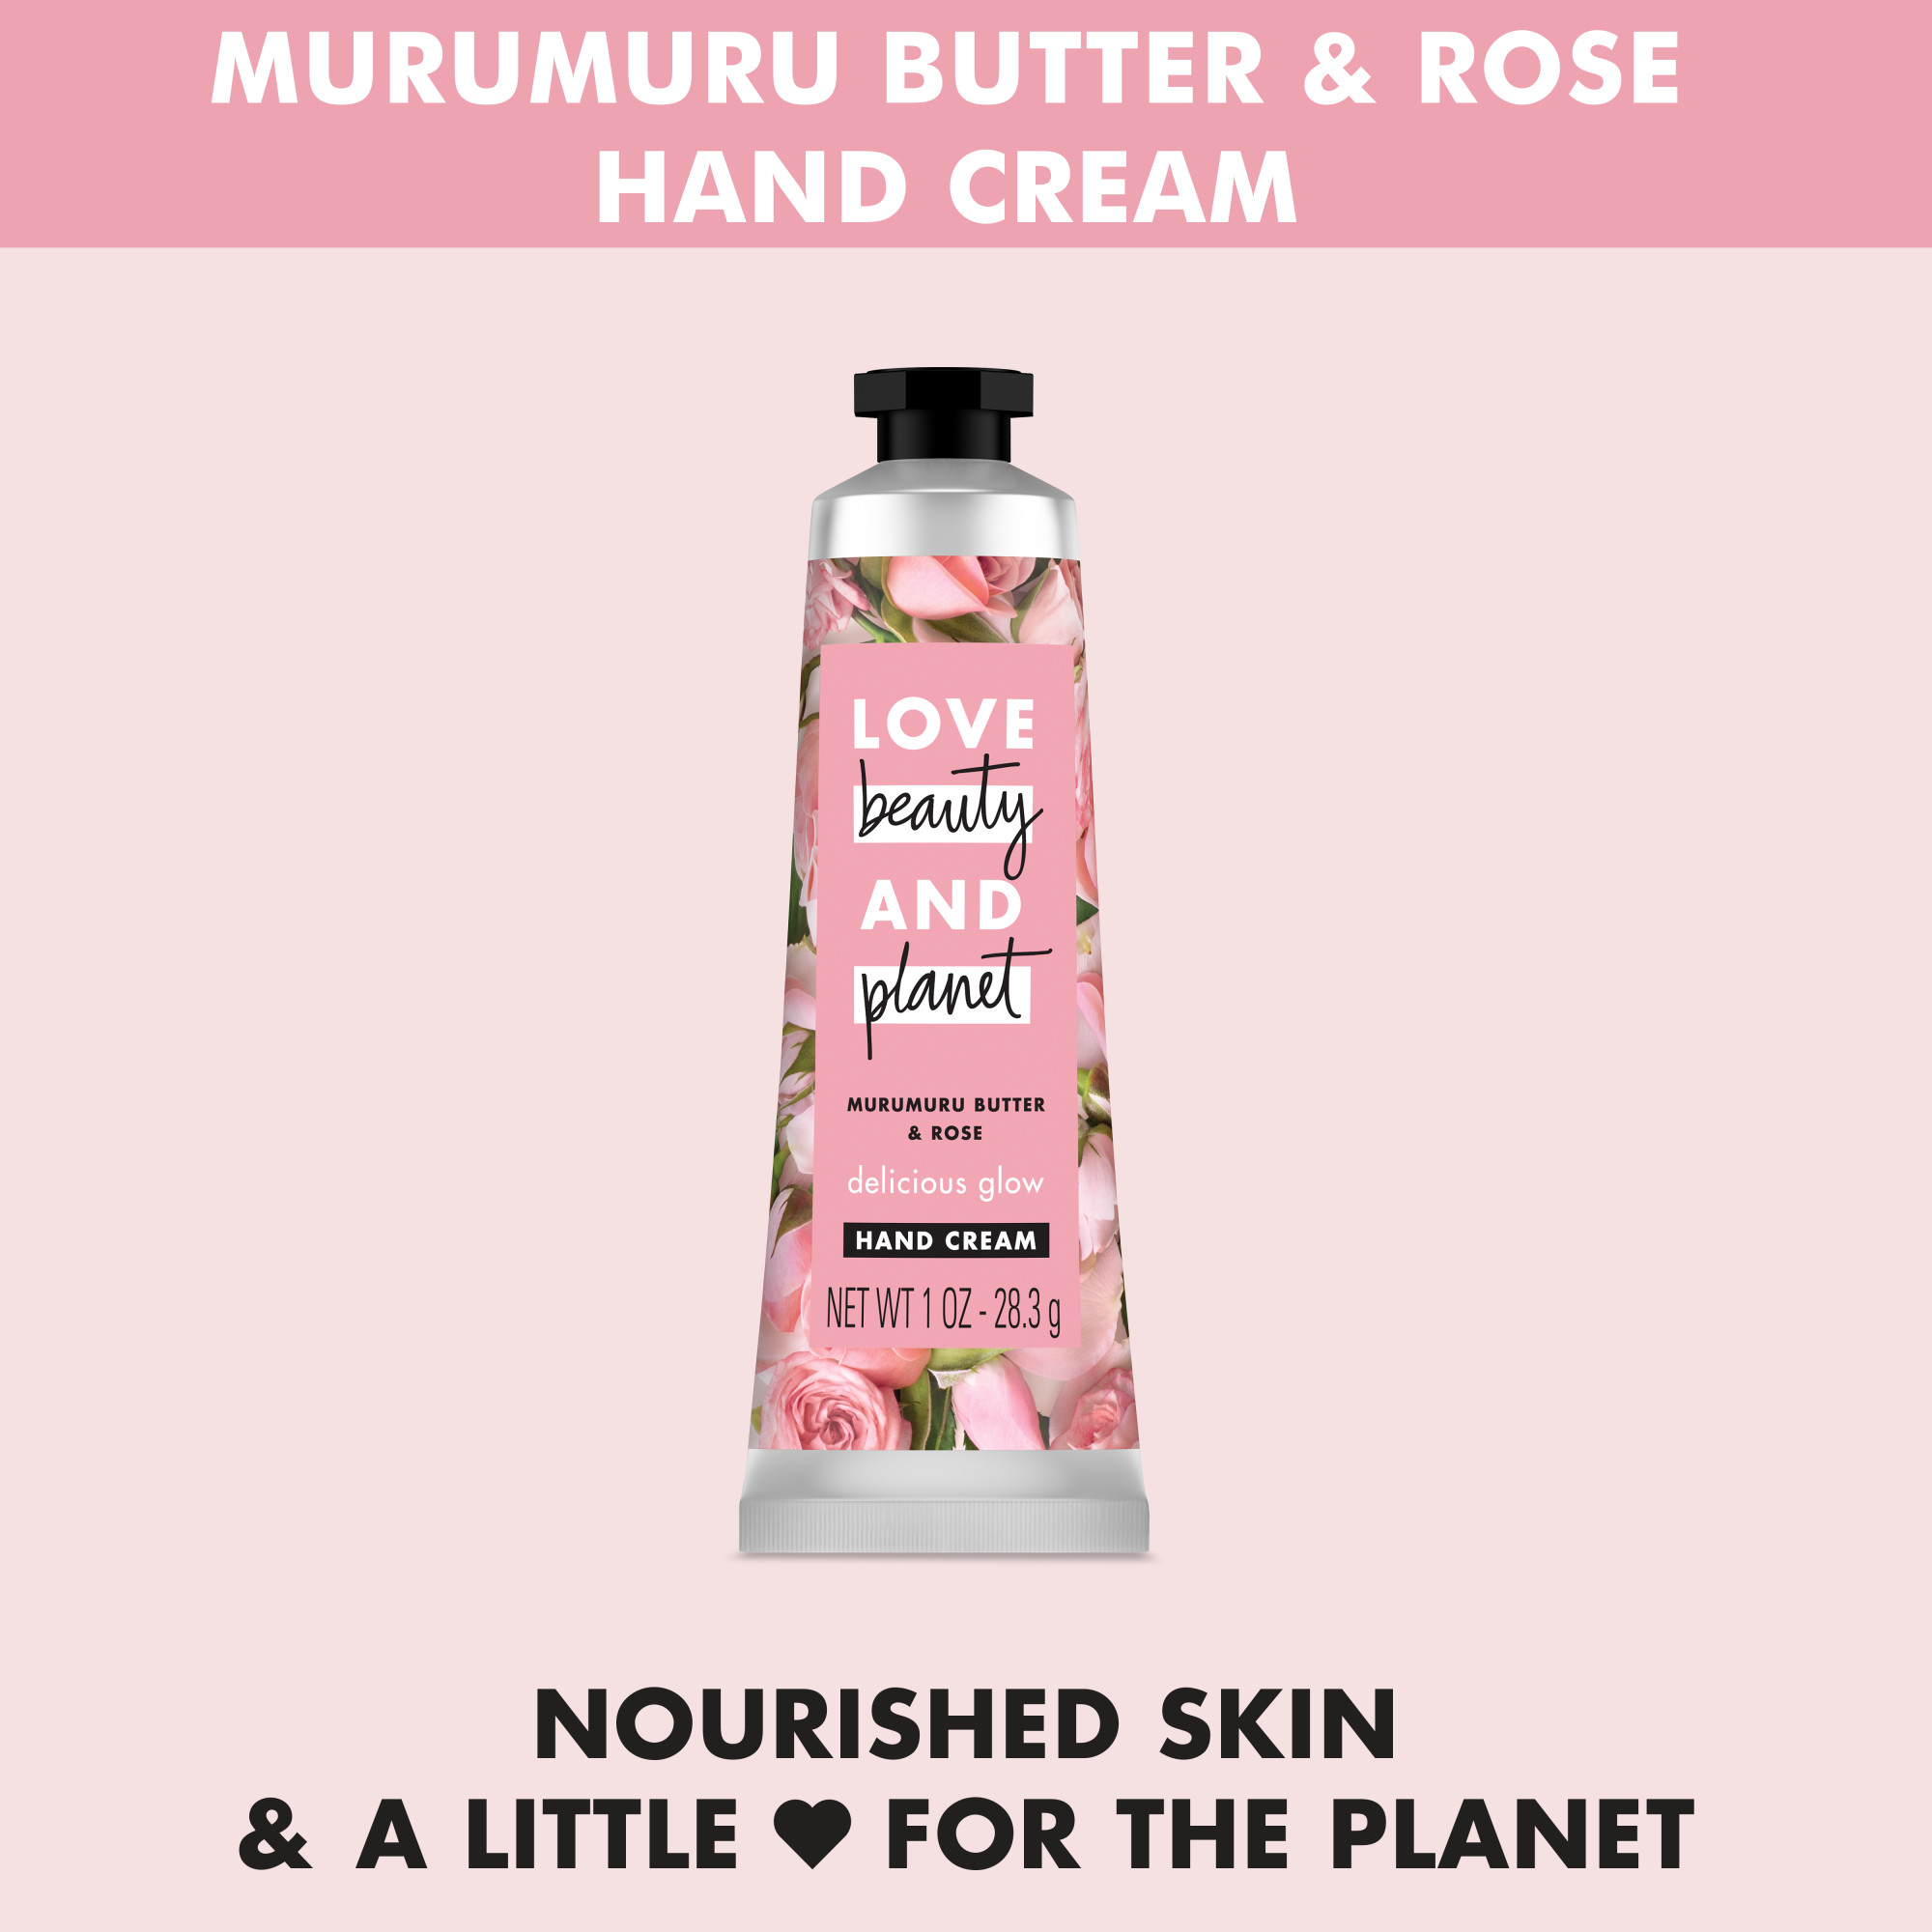 Love Beauty And Planet Murumuru Butter & Rose Hand Cream Delicious Glow 1 oz - image 4 of 9